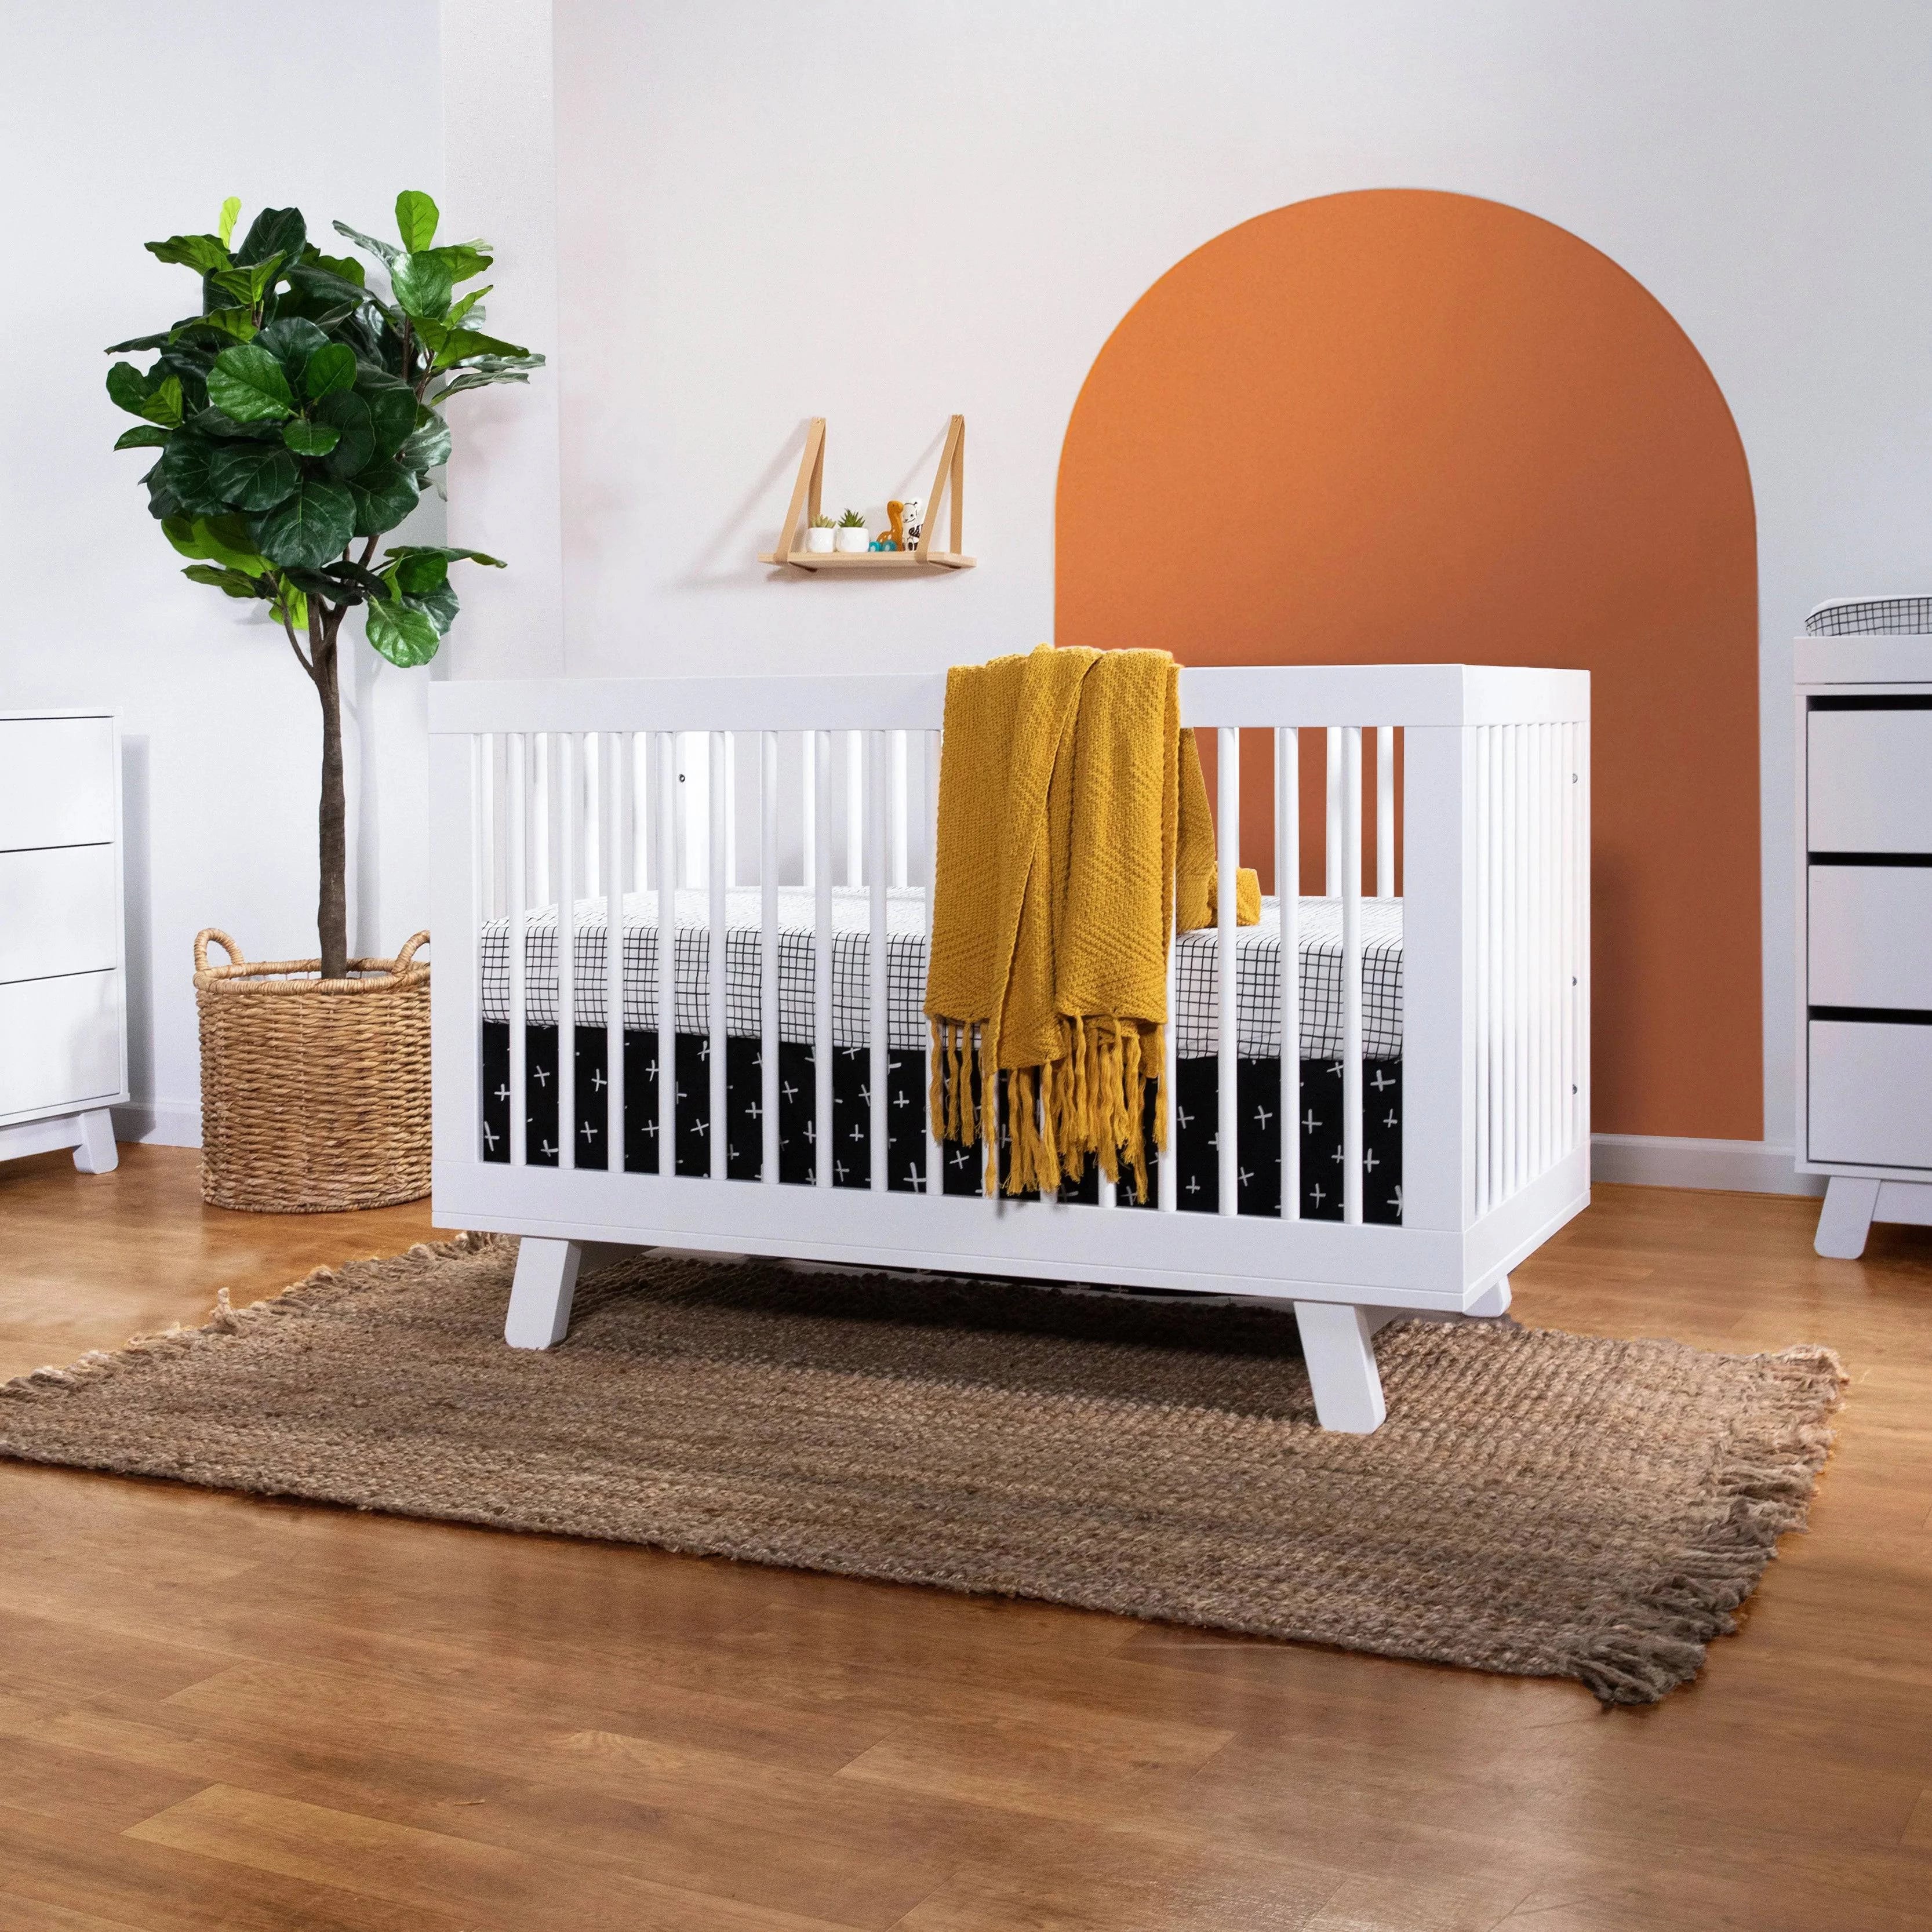 Hudson 3-in-1 Convertible Crib with Toddler Bed Conversion Kit - Twinkle Twinkle Little One